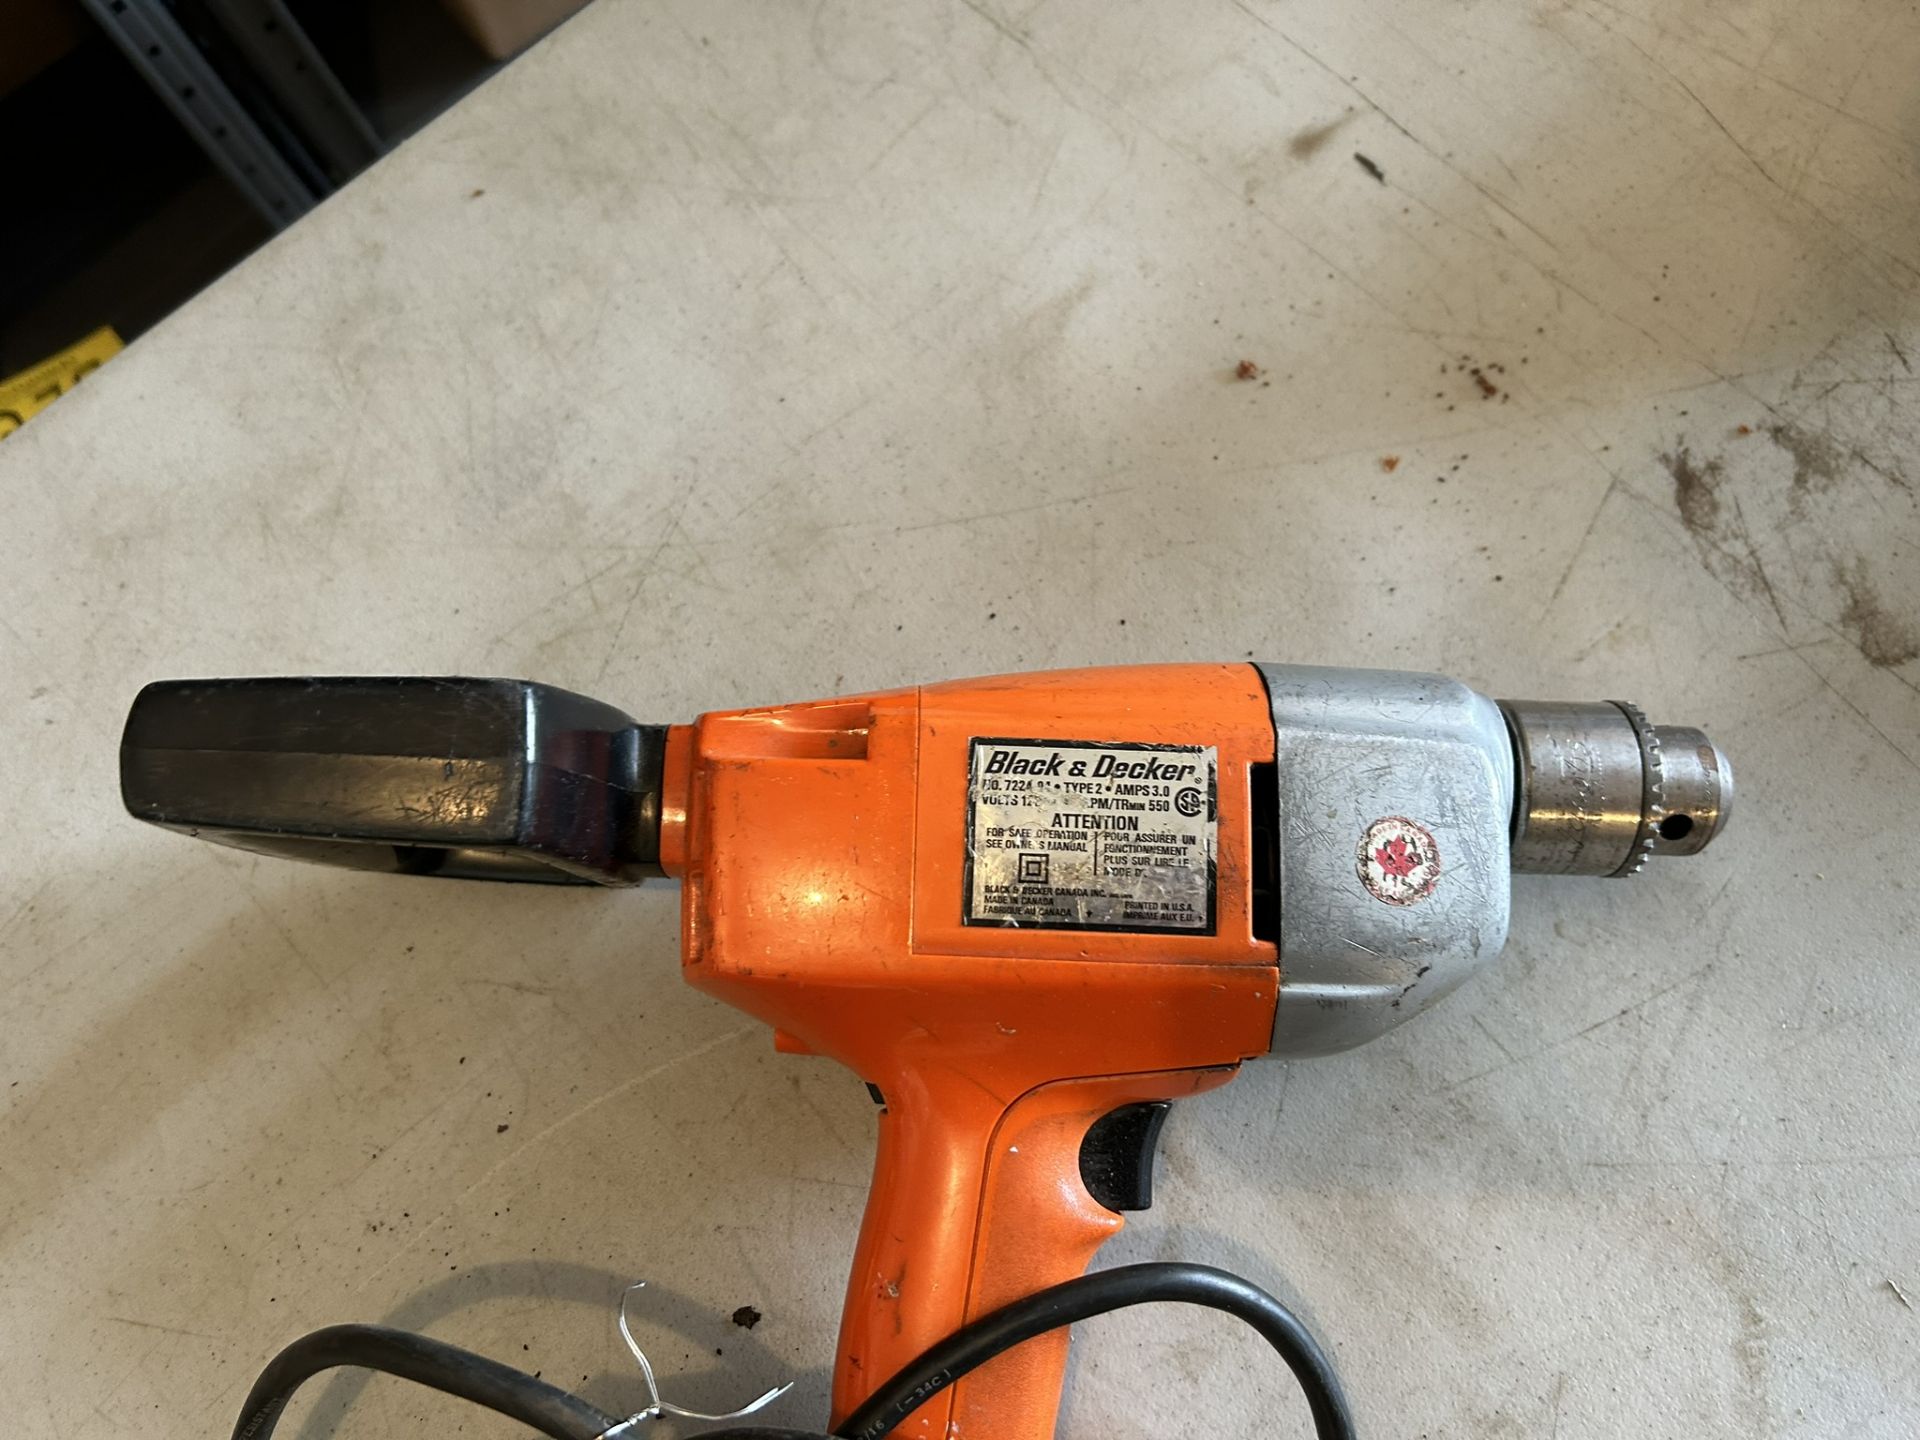 BLACK & DECKER 1/2" ELECTRIC DRILL - Image 4 of 4